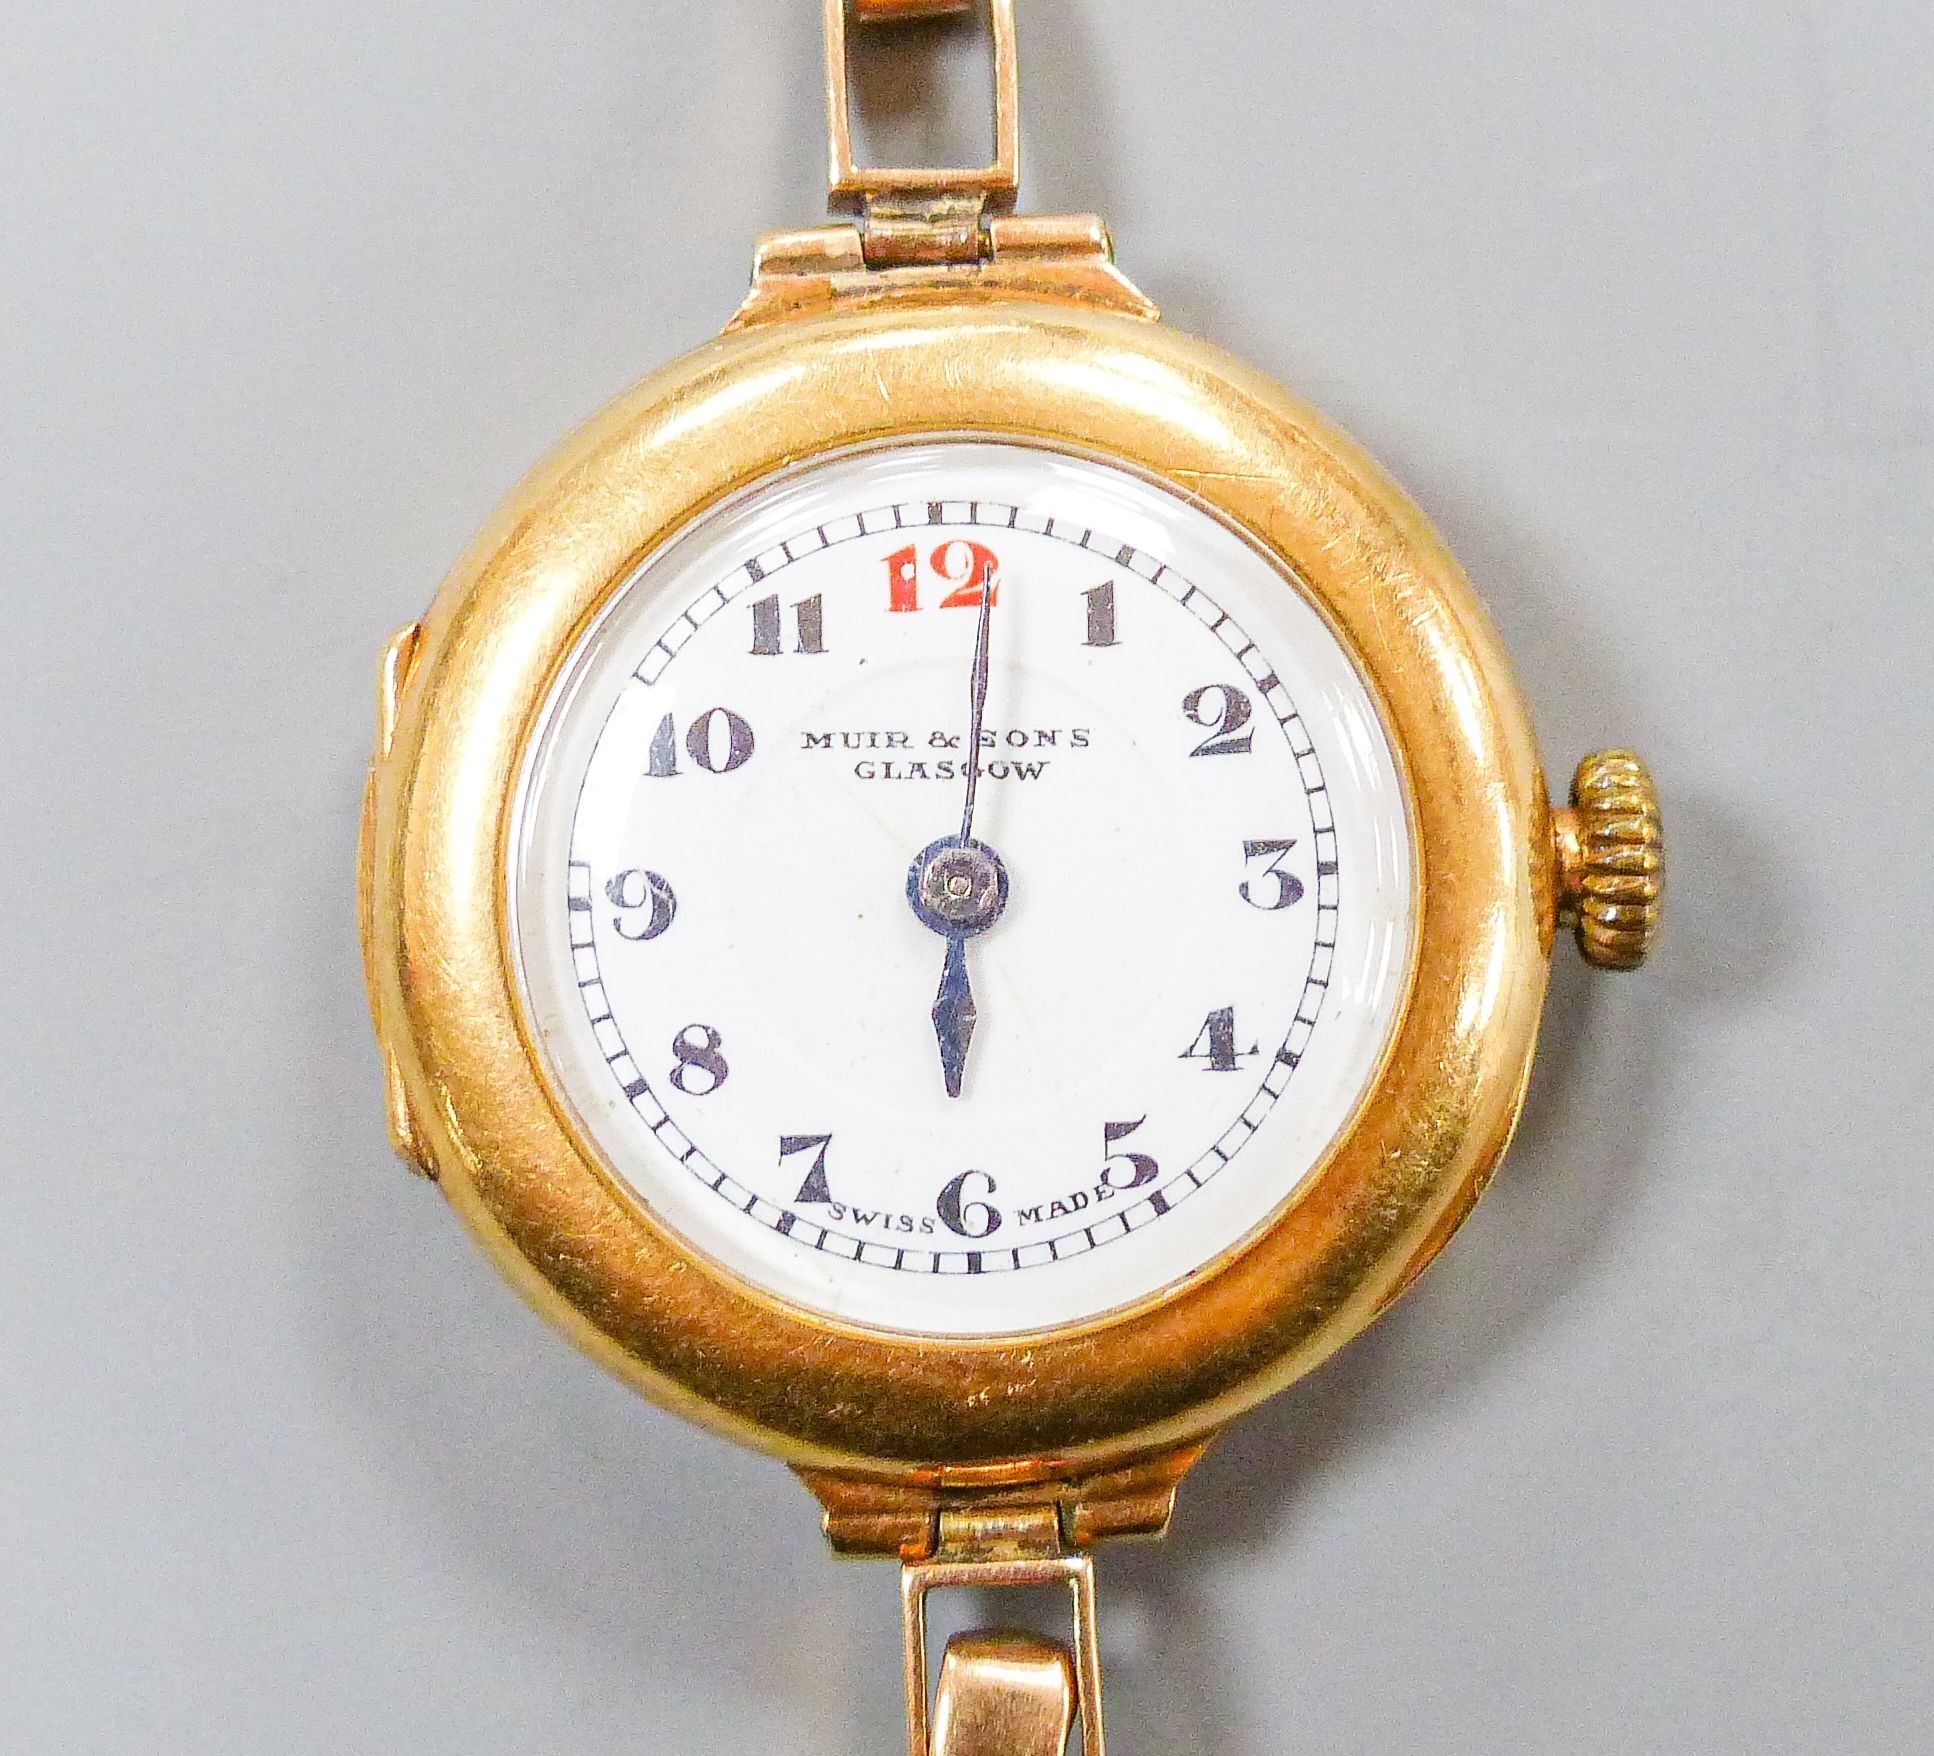 A lady's George V 18ct gold cased manual wind wrist watch, lacking bracelet, case hallmarked for Birmingham, 1917, retailed by Muir & Sons, Glasgow                                                                         